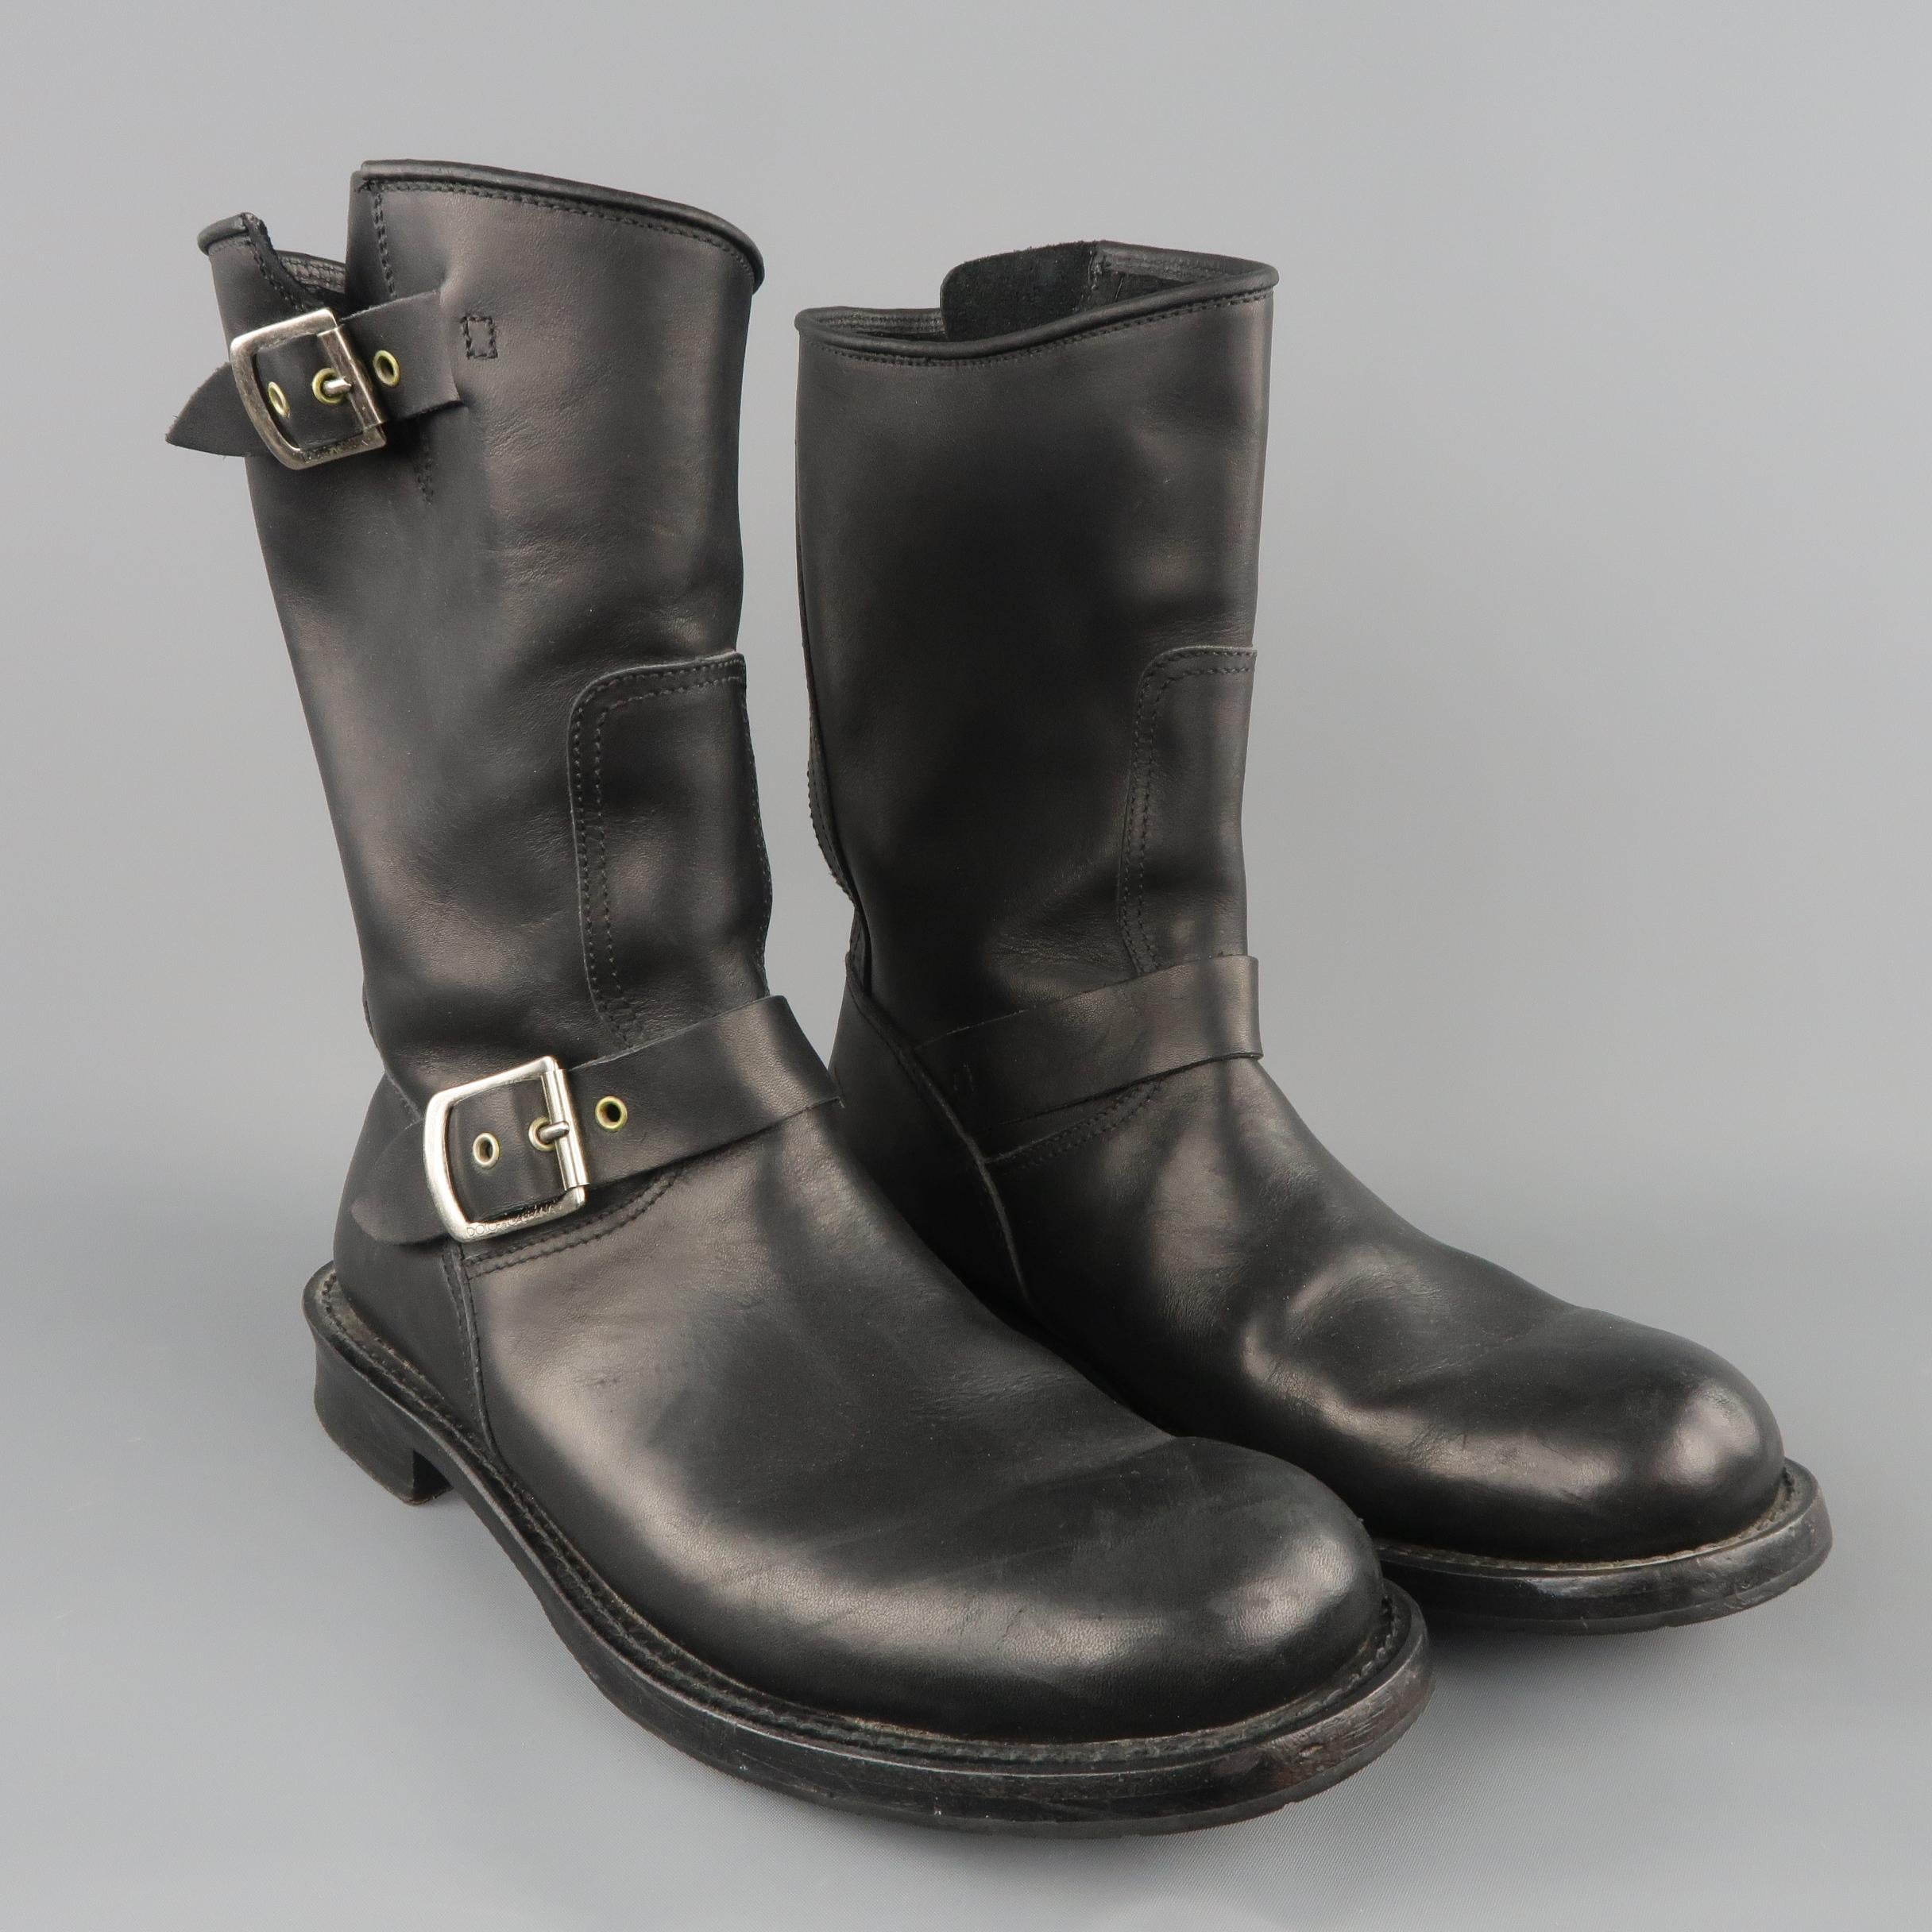 DOLCE & GABBANA biker boots come in smooth black leather with a round toe and double buckled straps. Made in Italy.
 
Good Pre-Owned Condition.
Marked: UK 7.5
 
Outsole: 12 x 4.5 in.
Length: 9.5 in.